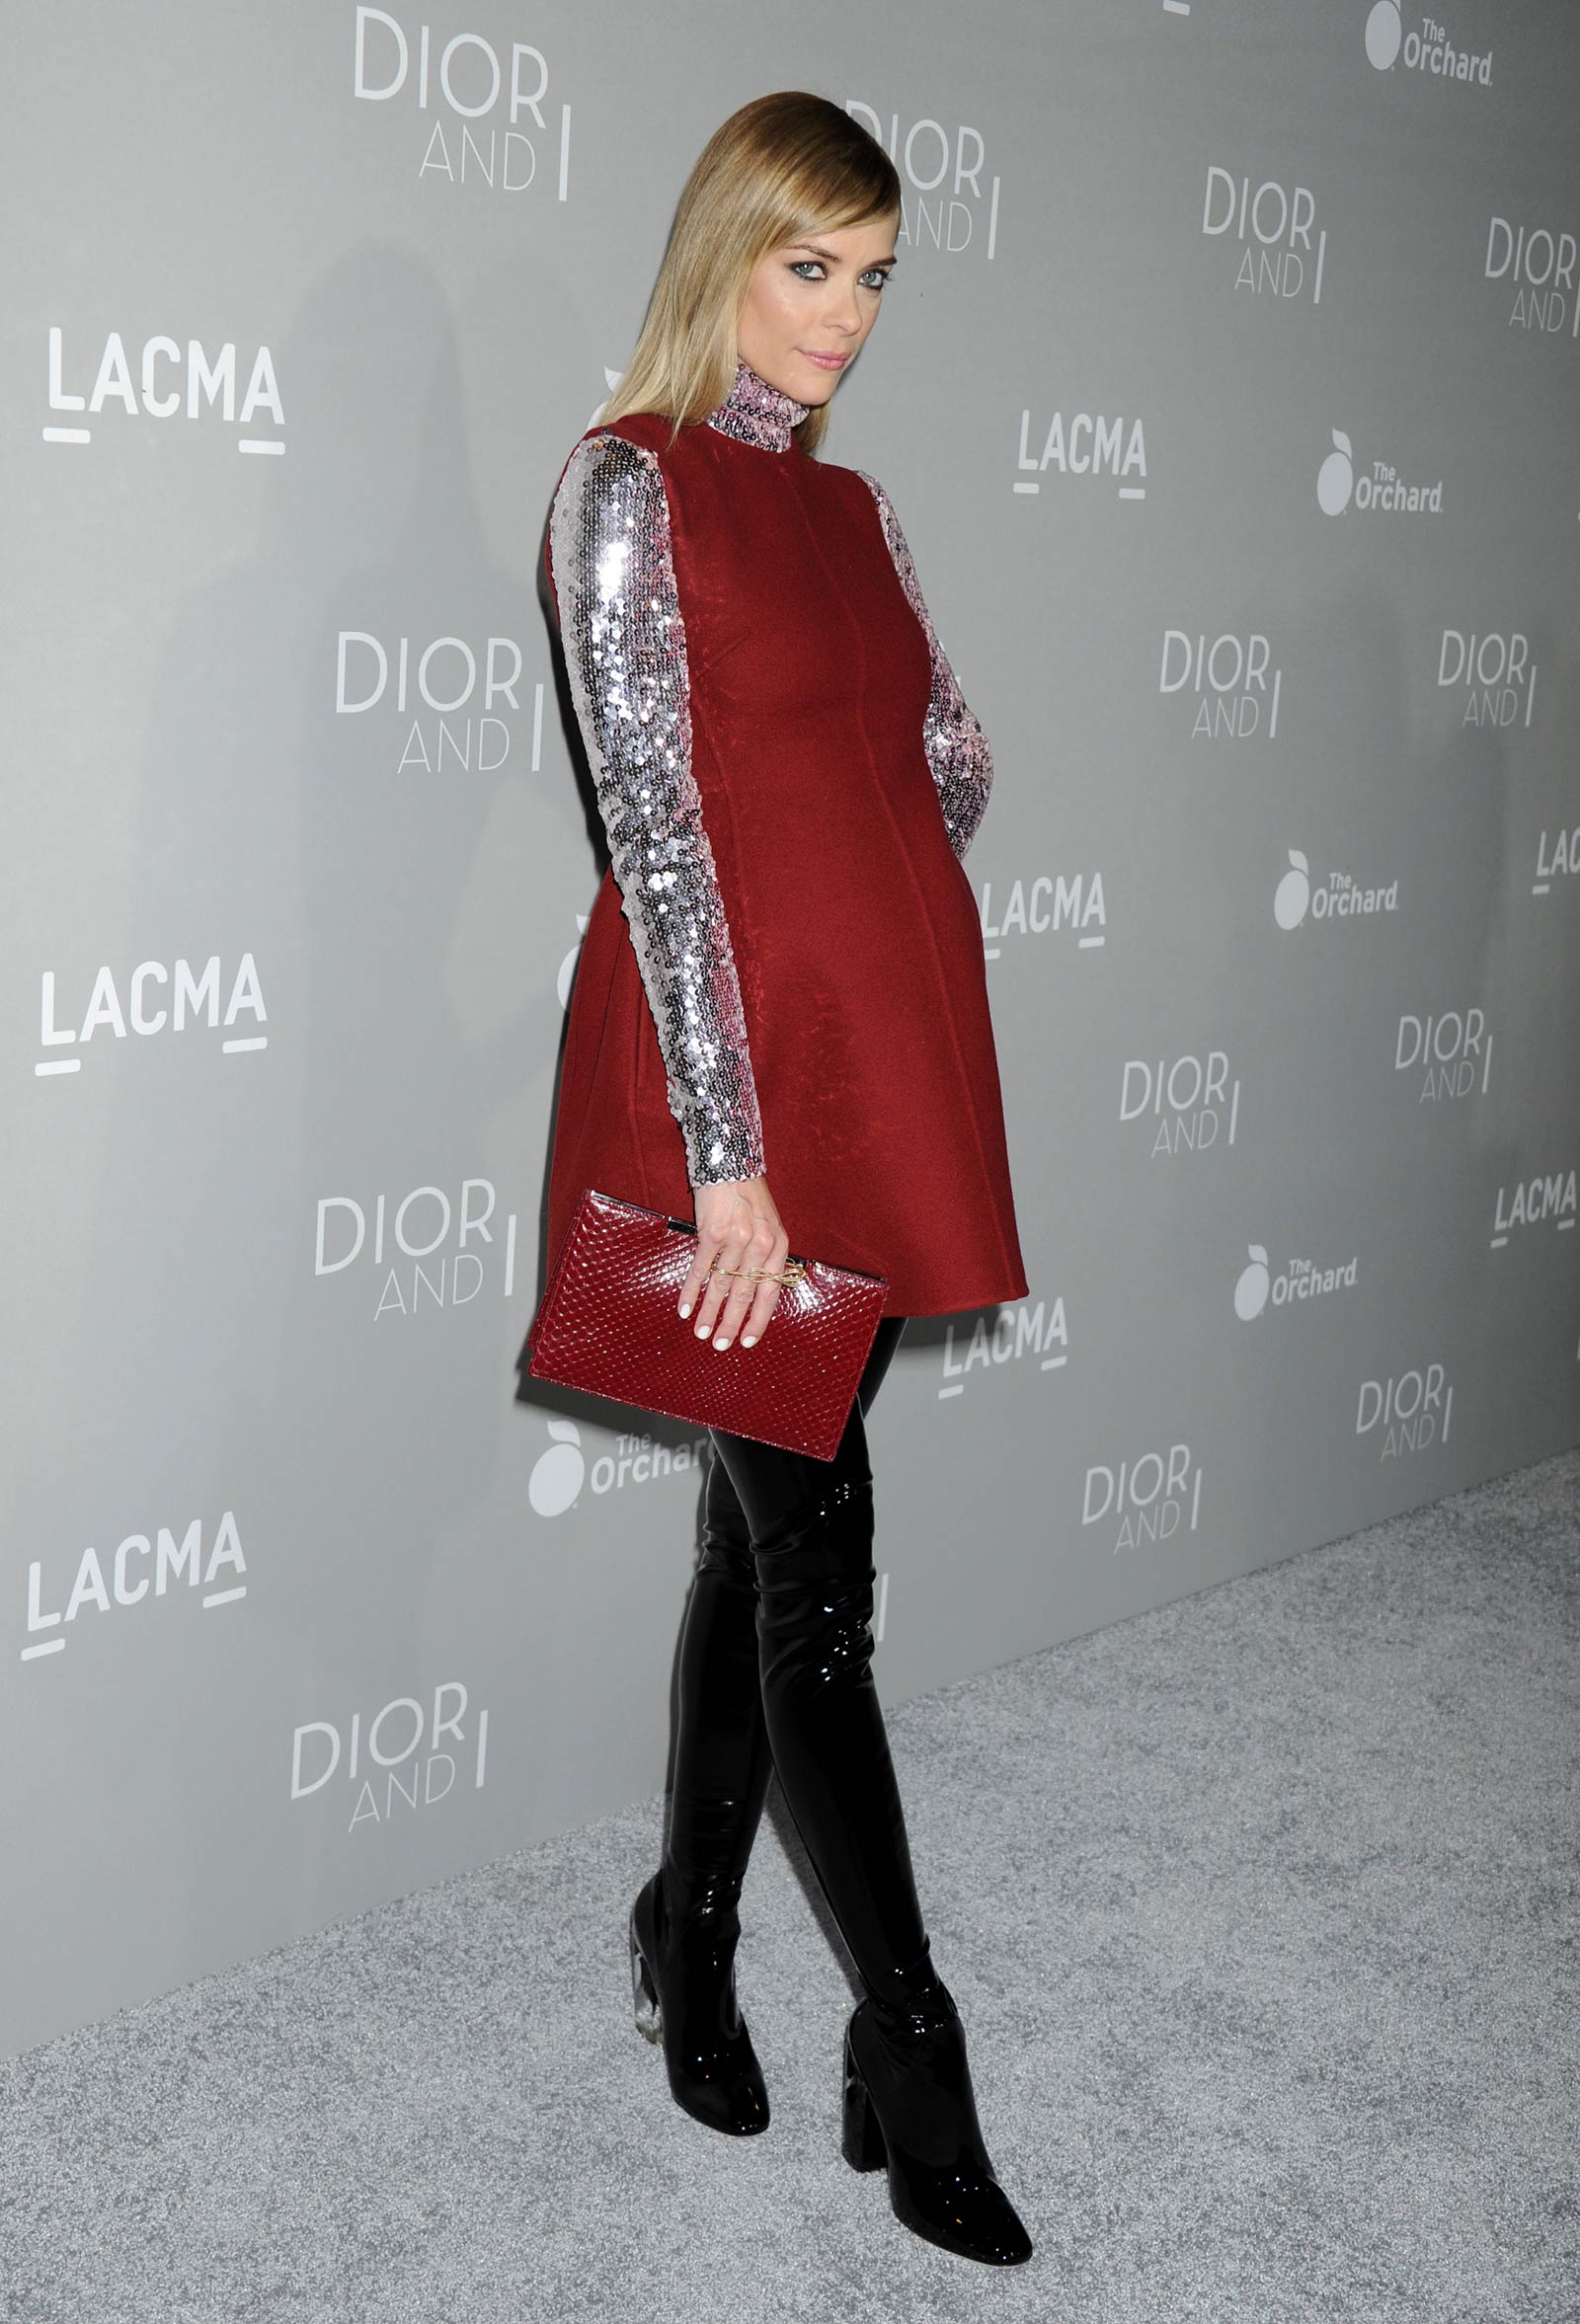 Jaime King attends Premiere of The Orchard’s DIOR & I